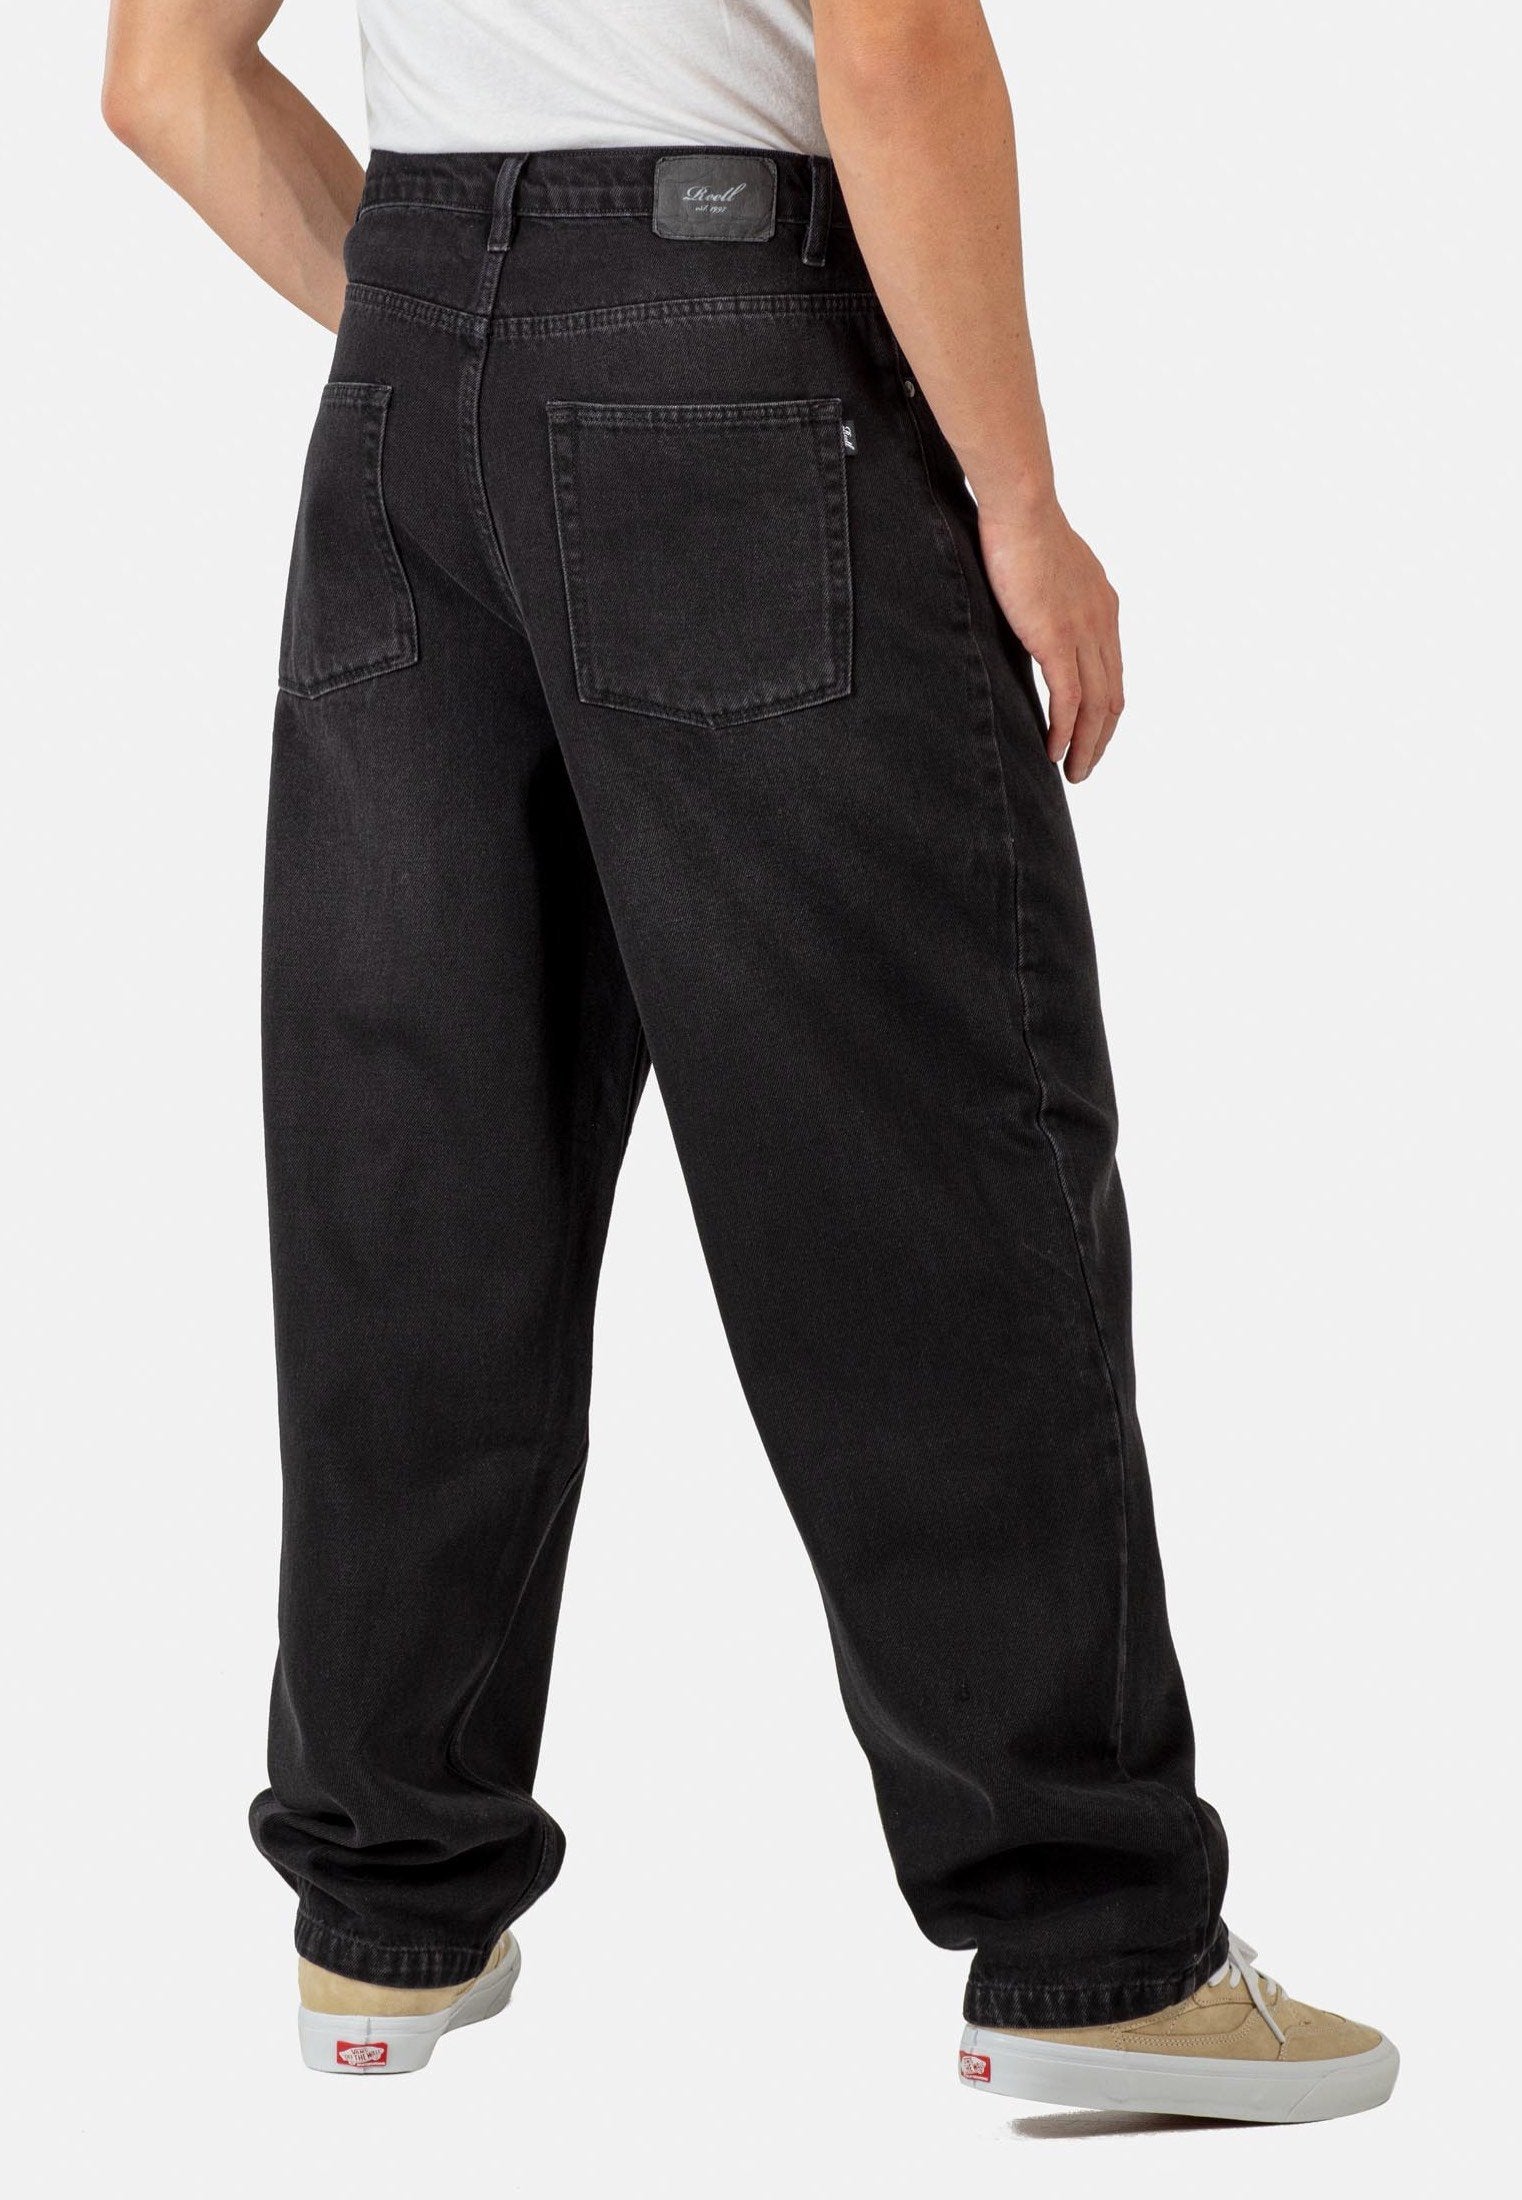 REELL - Baggy Black Wash - Jeans